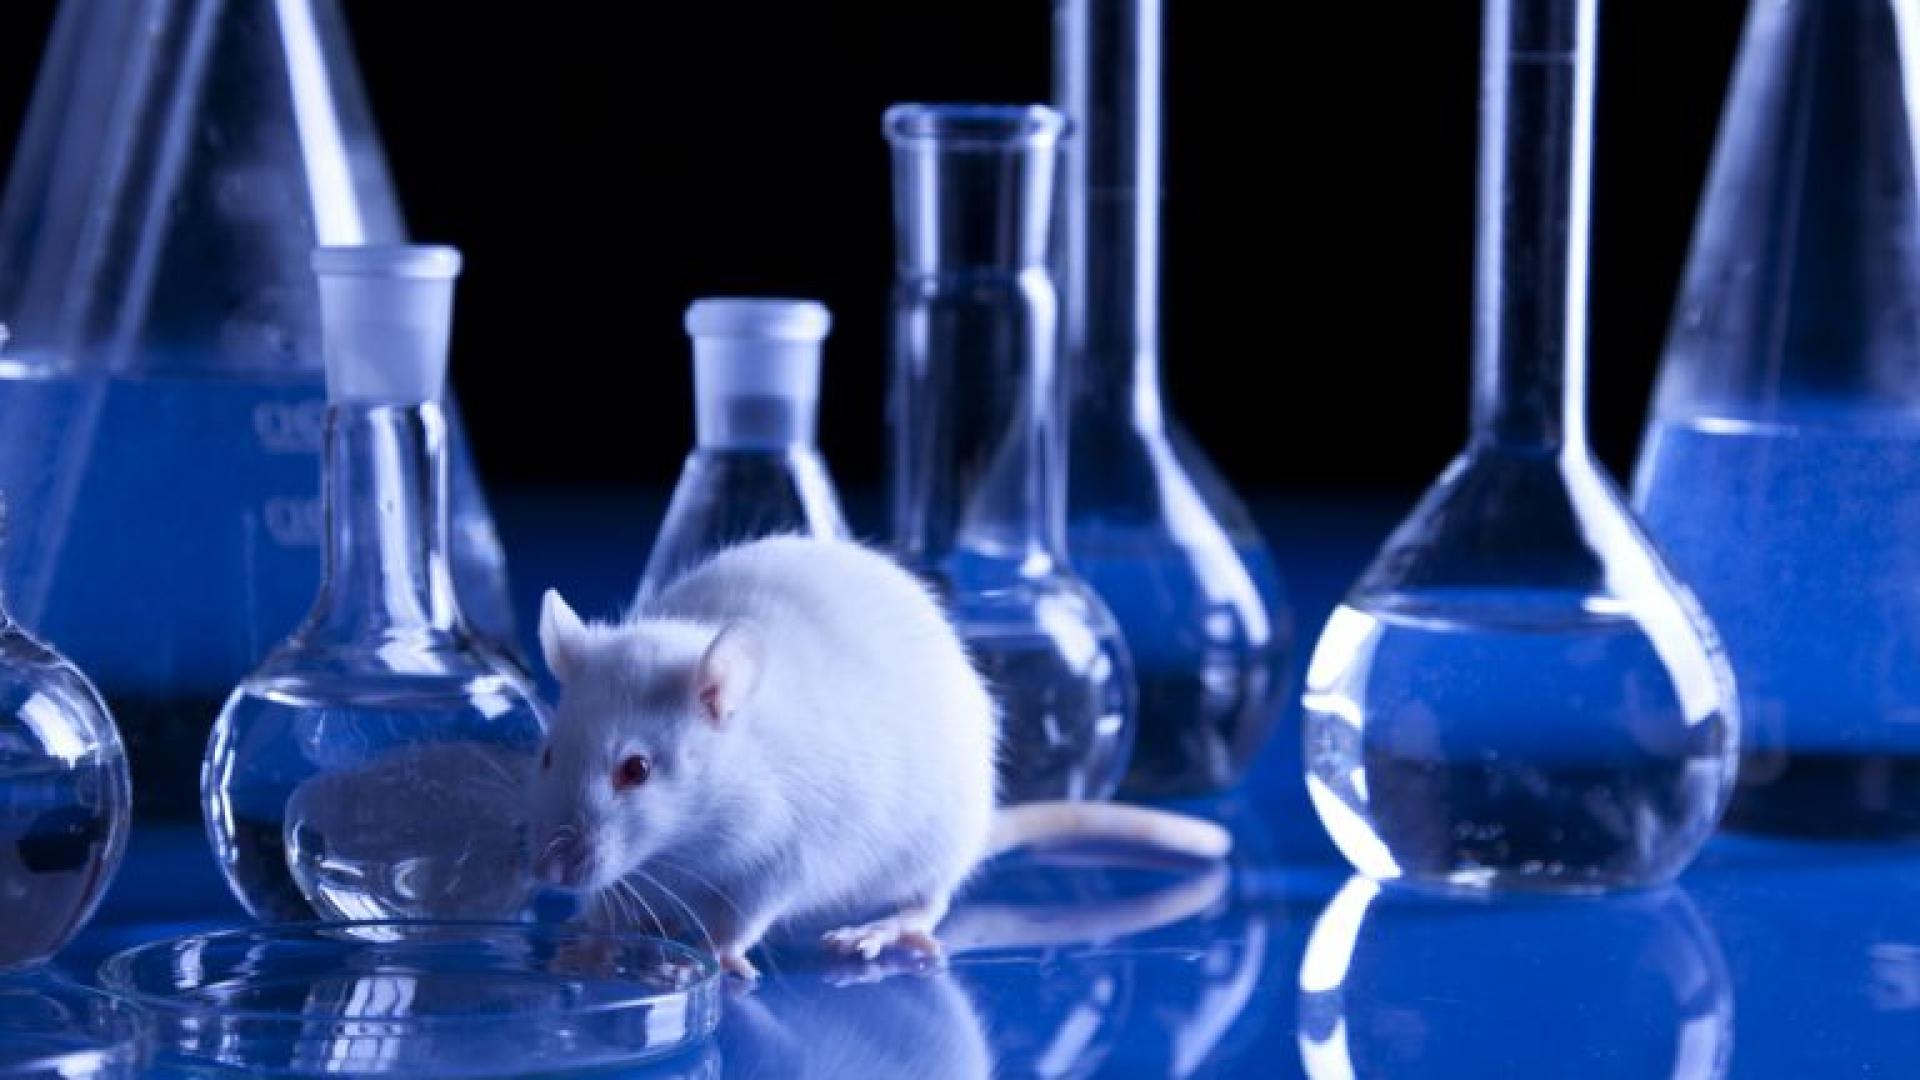 The use of animals for Science purposes is a difficult ethical problem